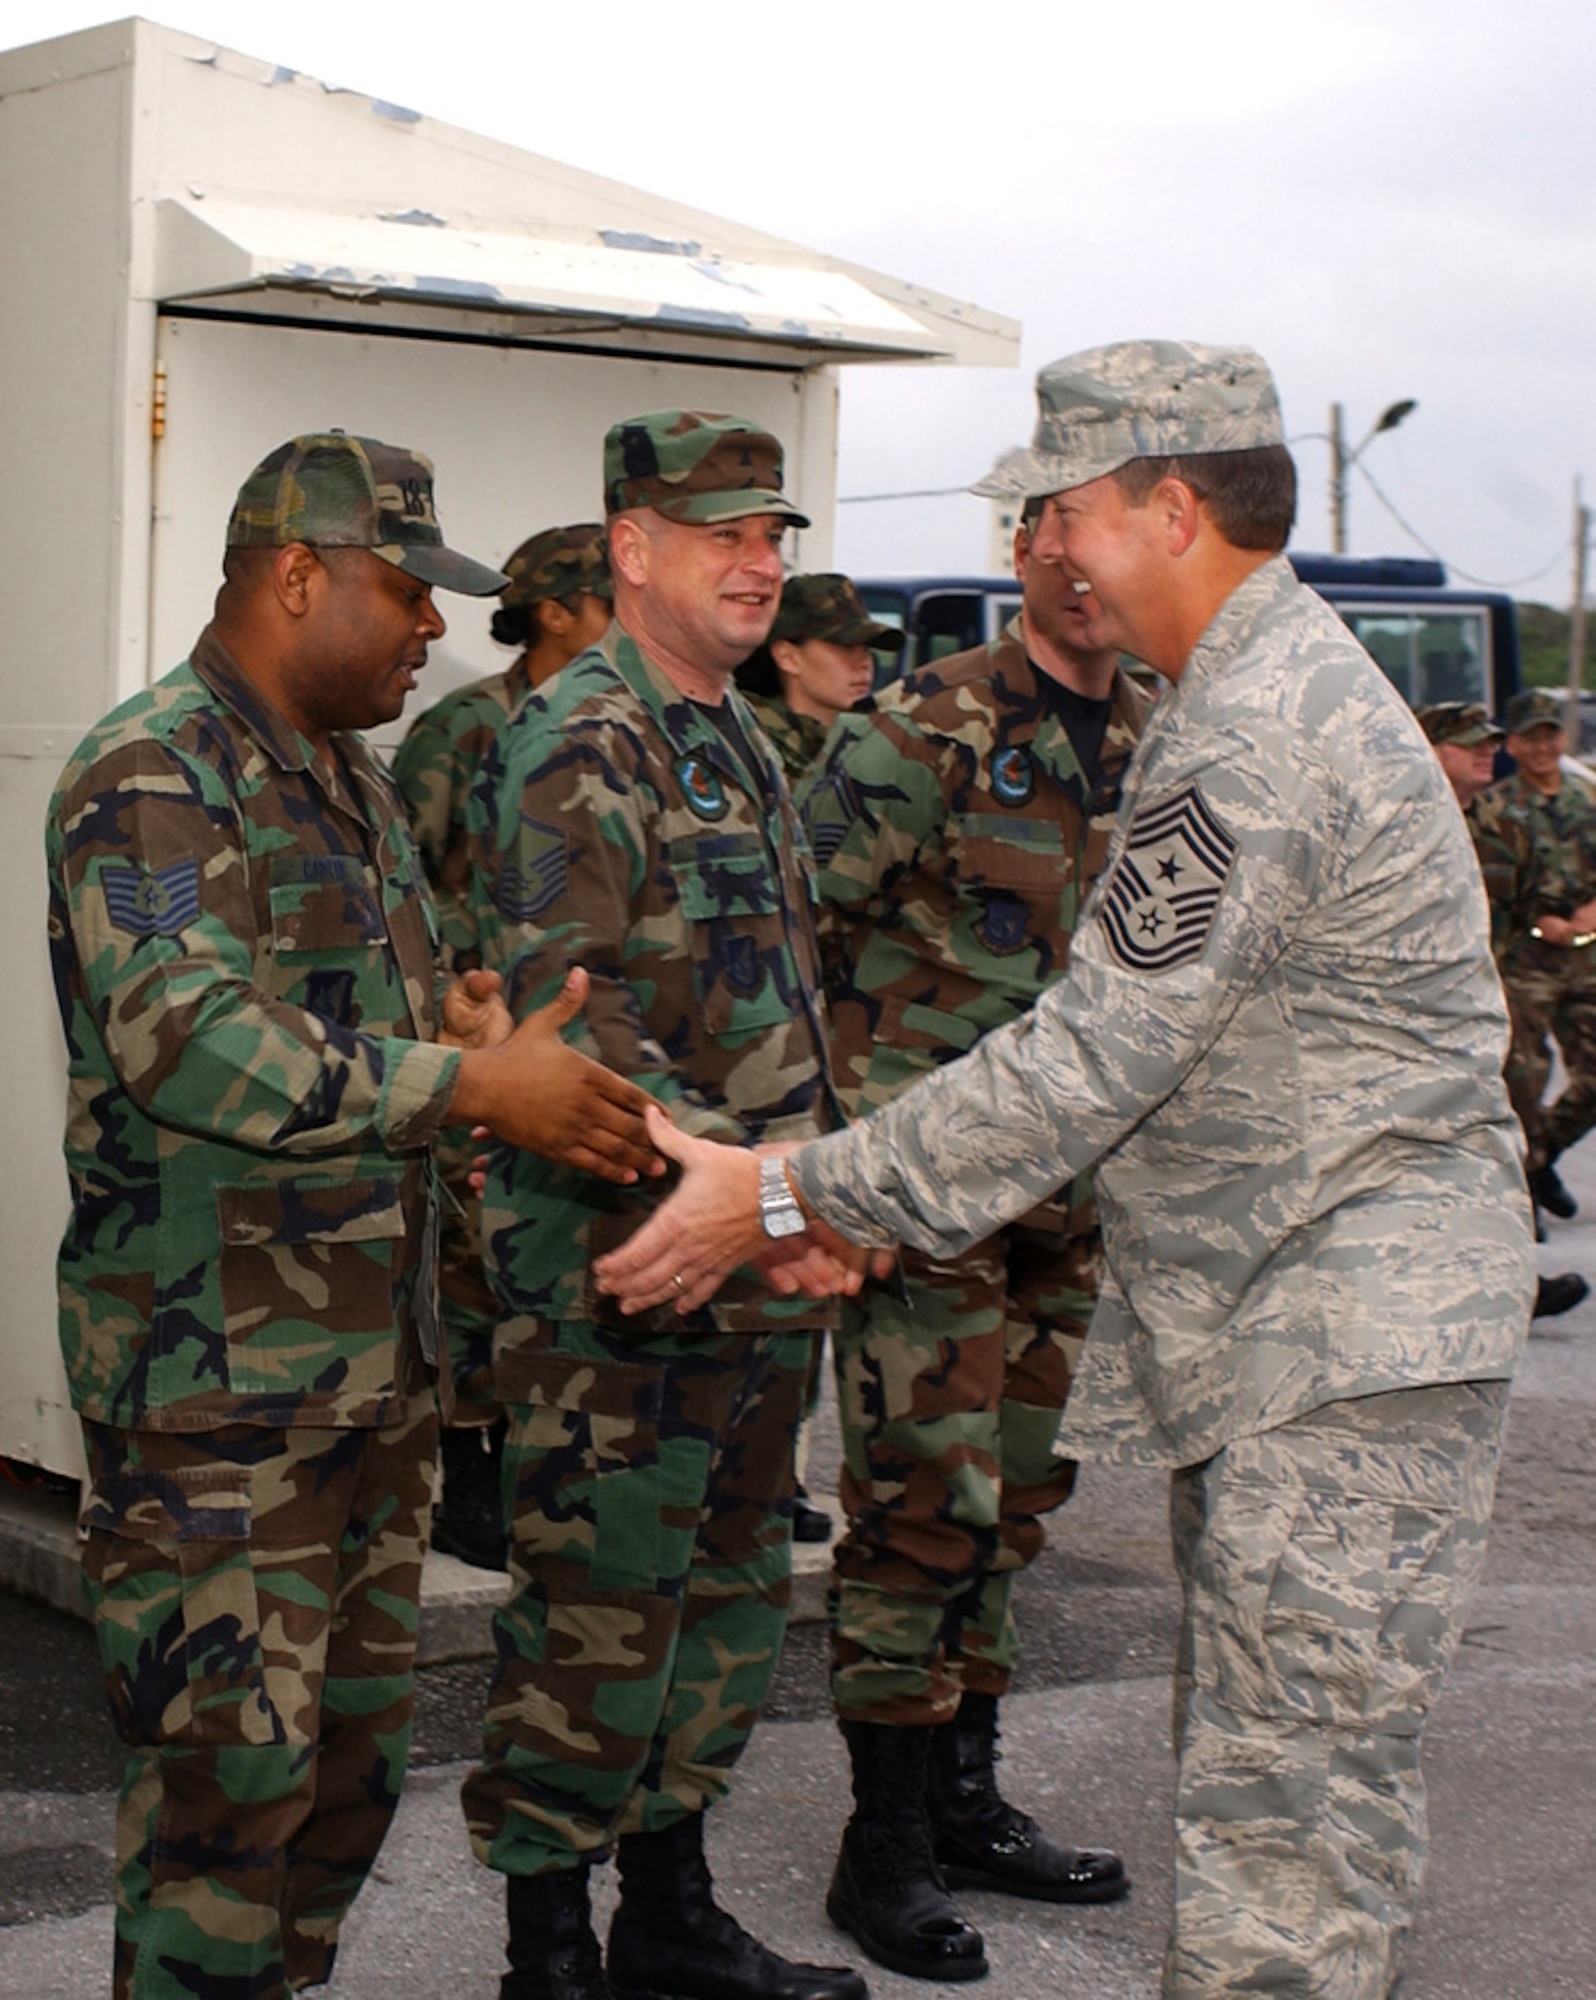 Chief Master Sgt. Rodney J. McKinley, shown here shaking hands with Airmen, has been selected as the 15th chief master sergeant of the Air Force by Air Force Chief of Staff Gen. T. Michael Moseley.  He will replace Chief Master Sgt. of the Air Force Gerald R. Murray on July 1, following Chief Murray's retirement June 30.  Chief McKinley currently serves as the command chief master sergeant for Pacific Air Forces.  (U.S. Air Force photo)
